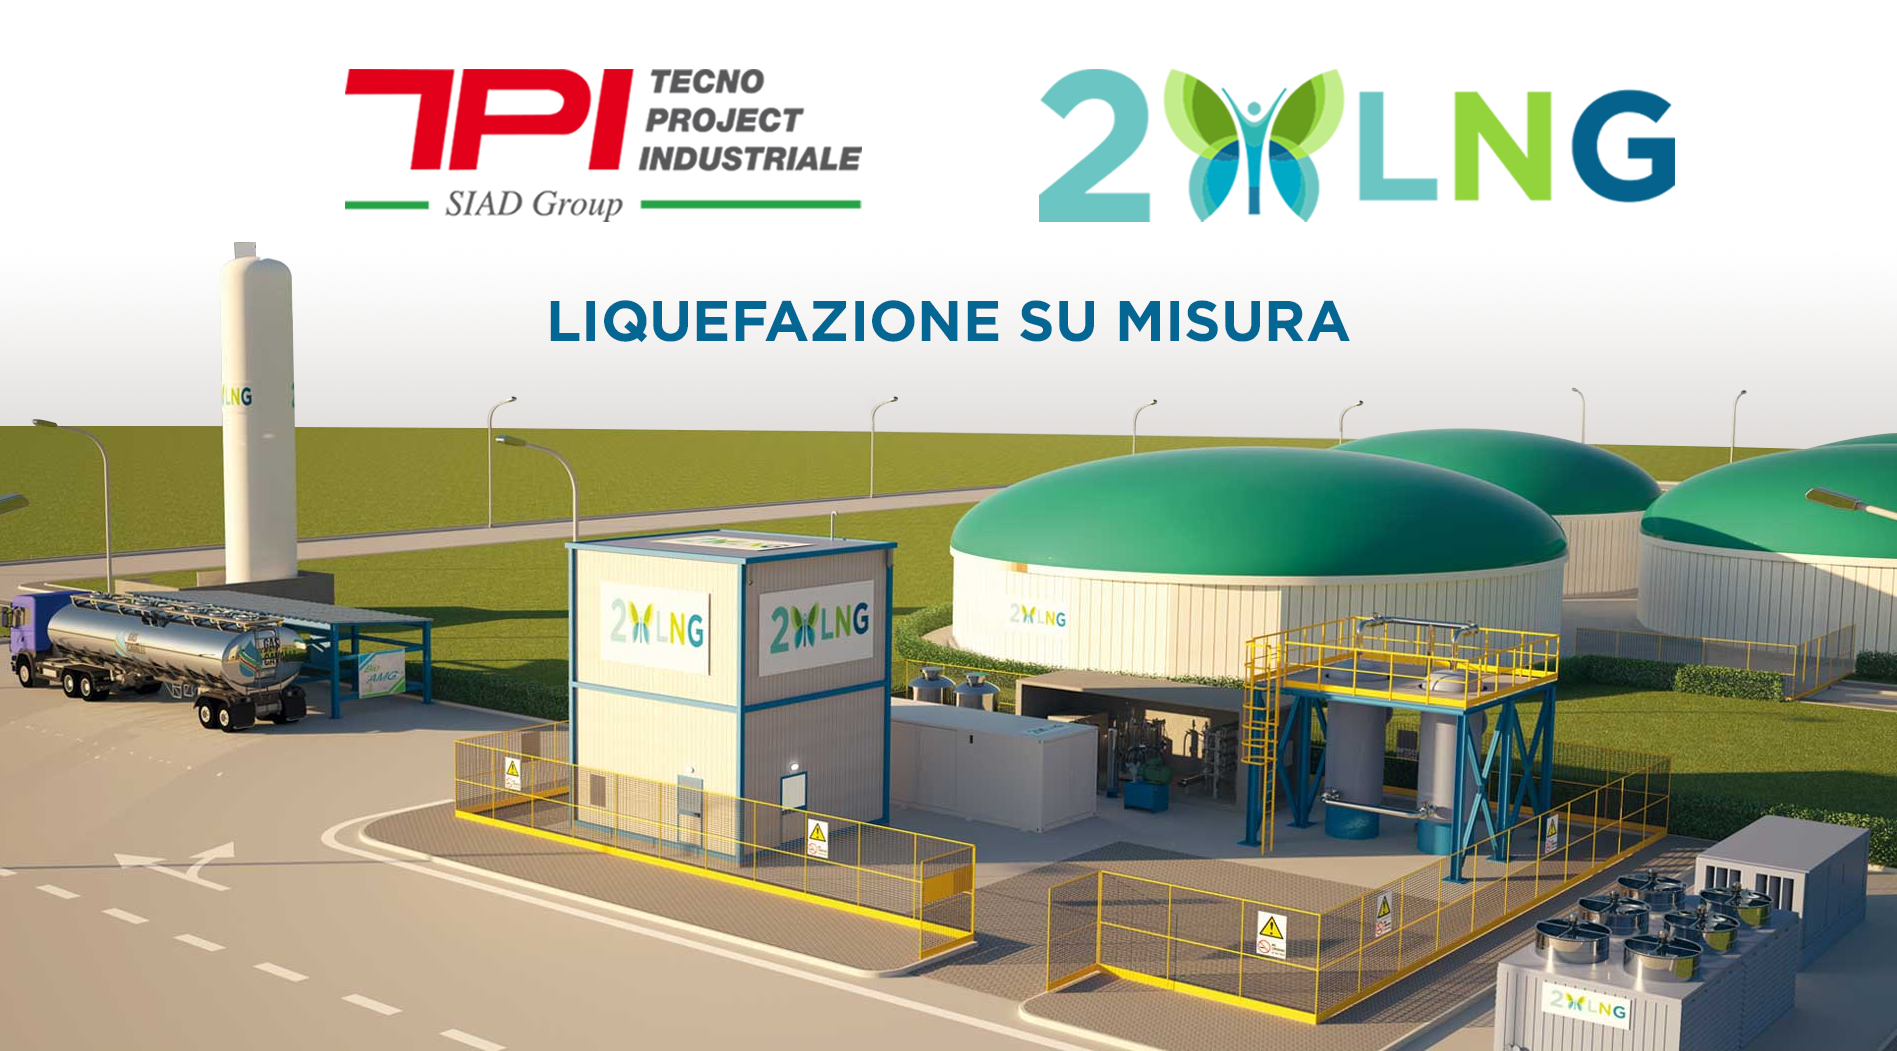 Tecno Project Industriale and 2LNG join forces in the biogas liquefaction chain